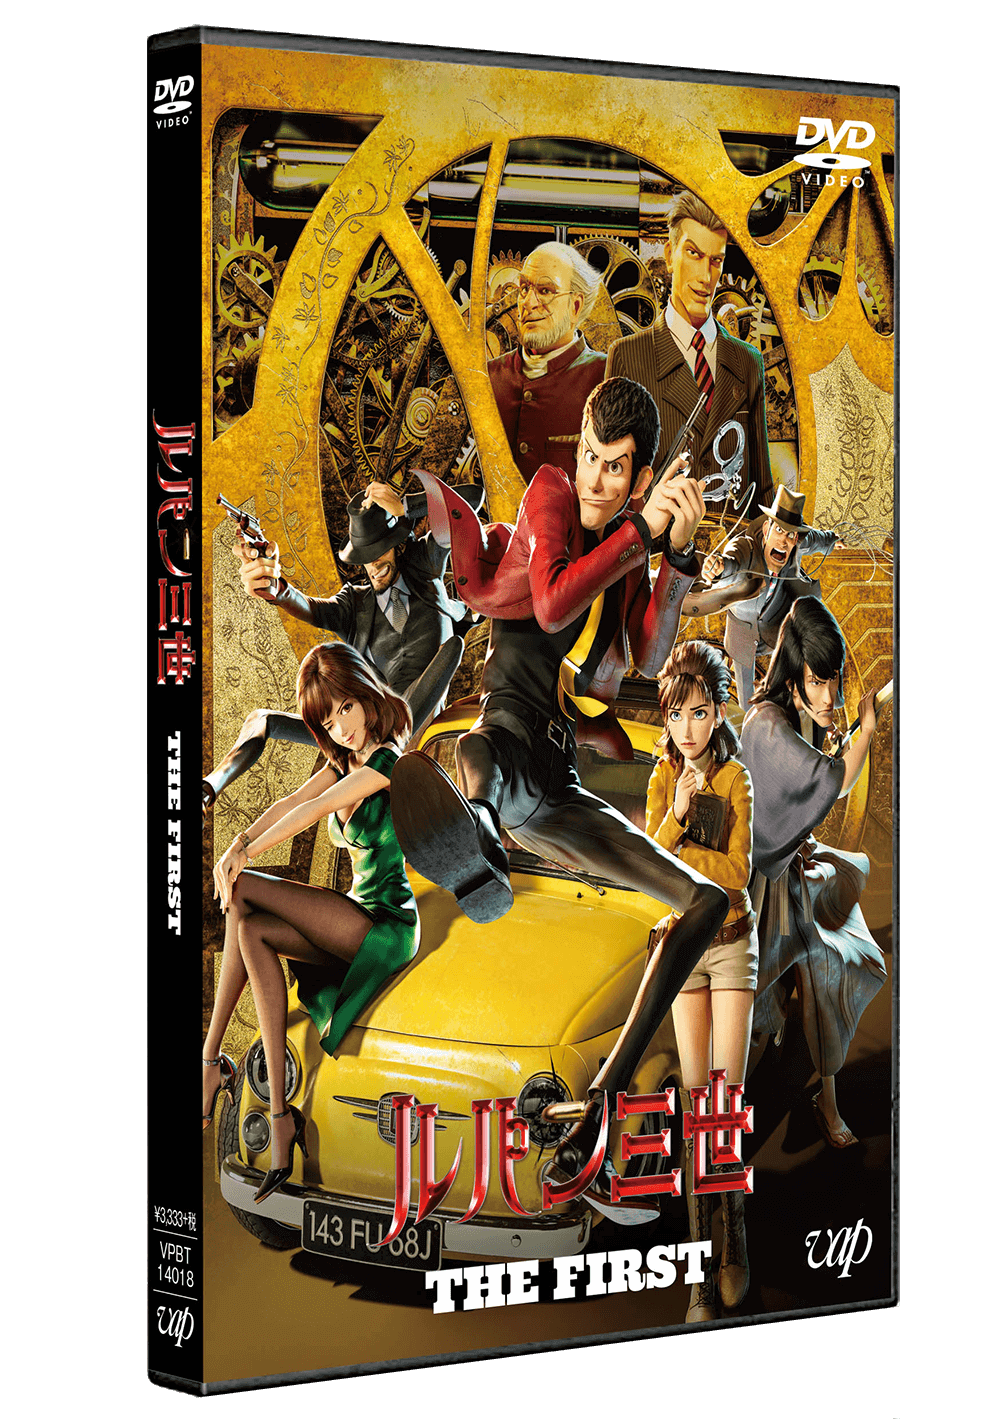 Lupin III: The First to get home video release in Japan! — Lupin